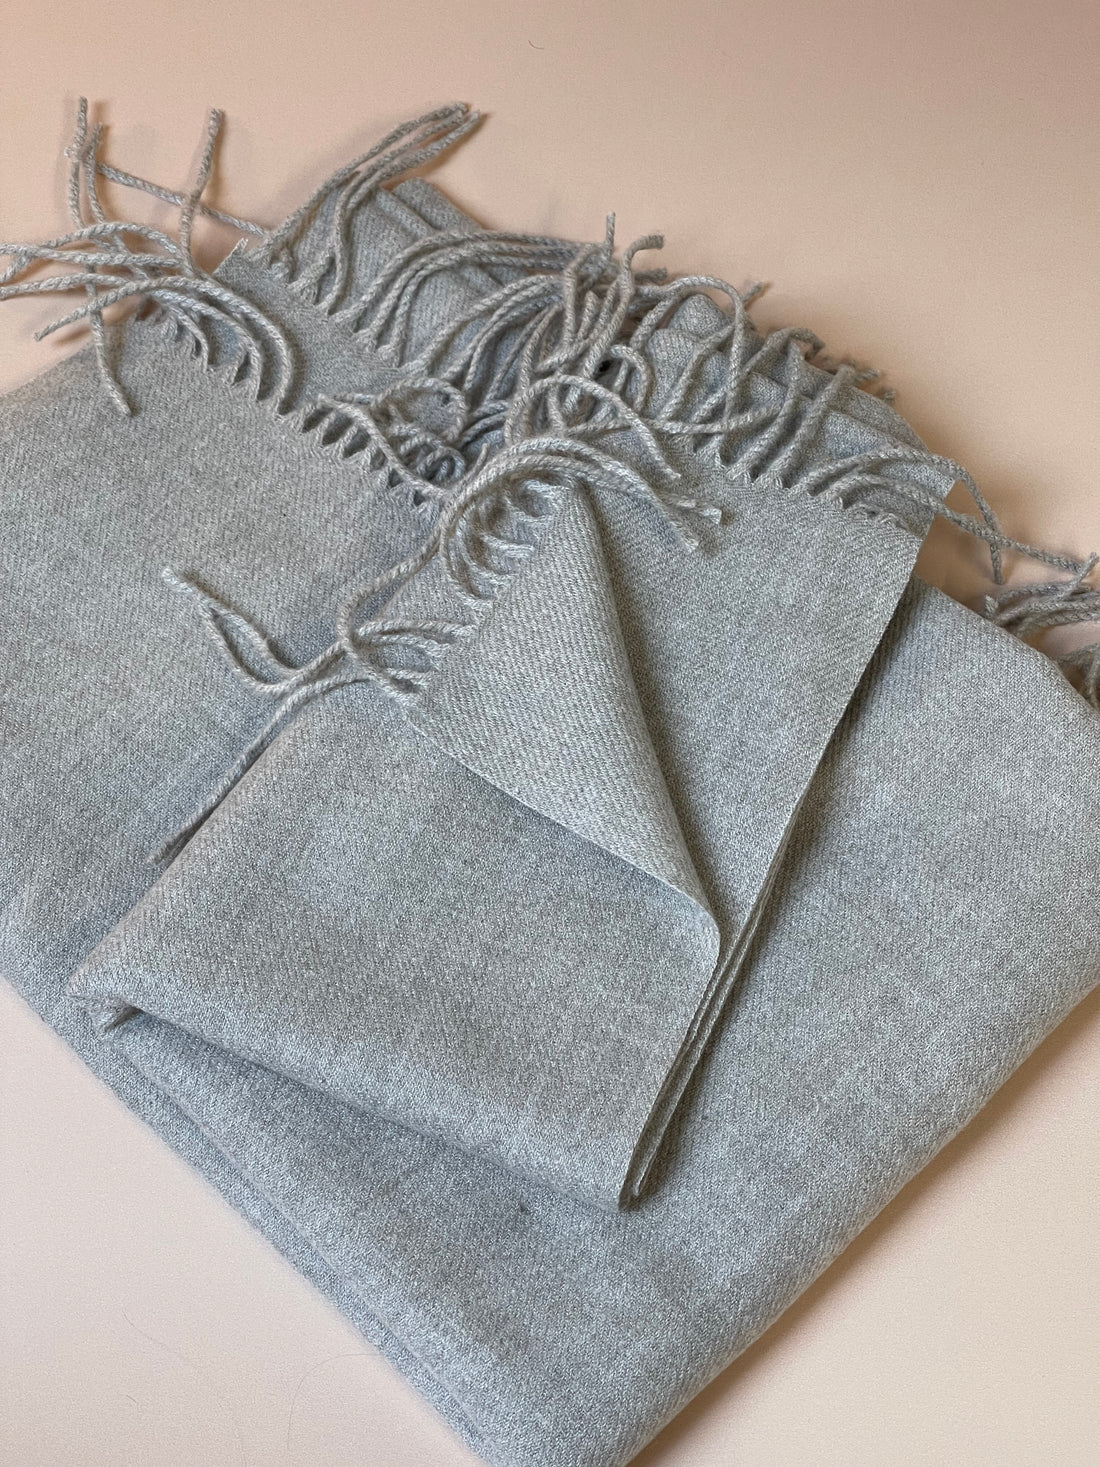 Soft, thin grey bed runner, adding a subtle layer of texture and warmth to your bedding ensemble.